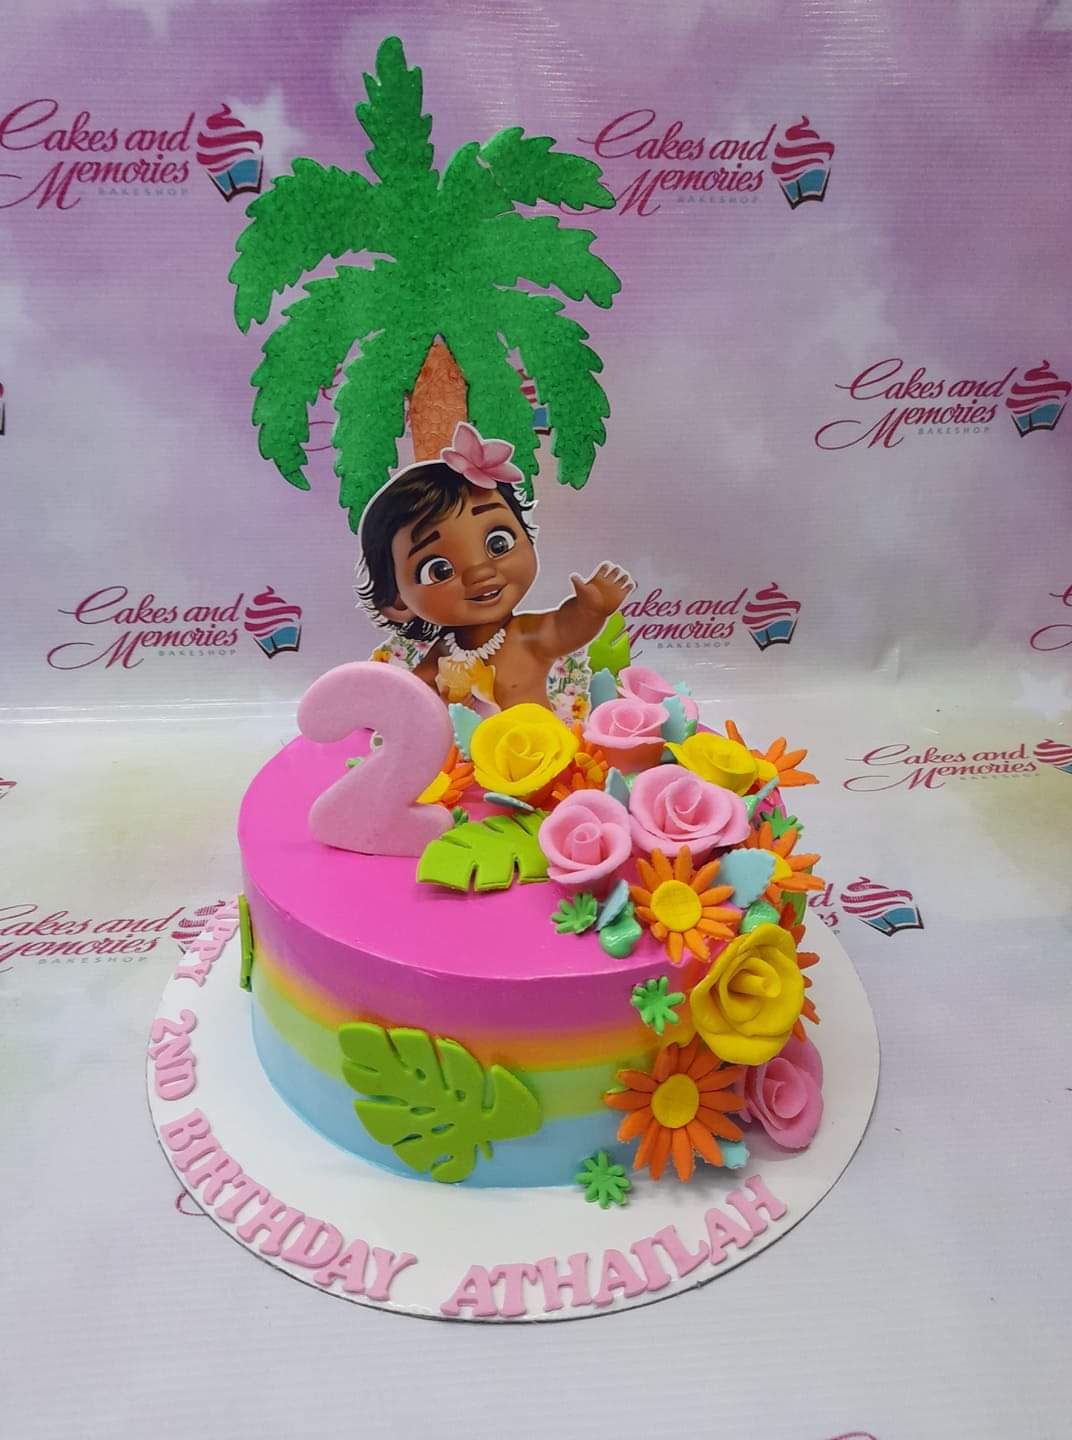 Special themed birthday cakes - MOANA | Aster Vender Catering & R...